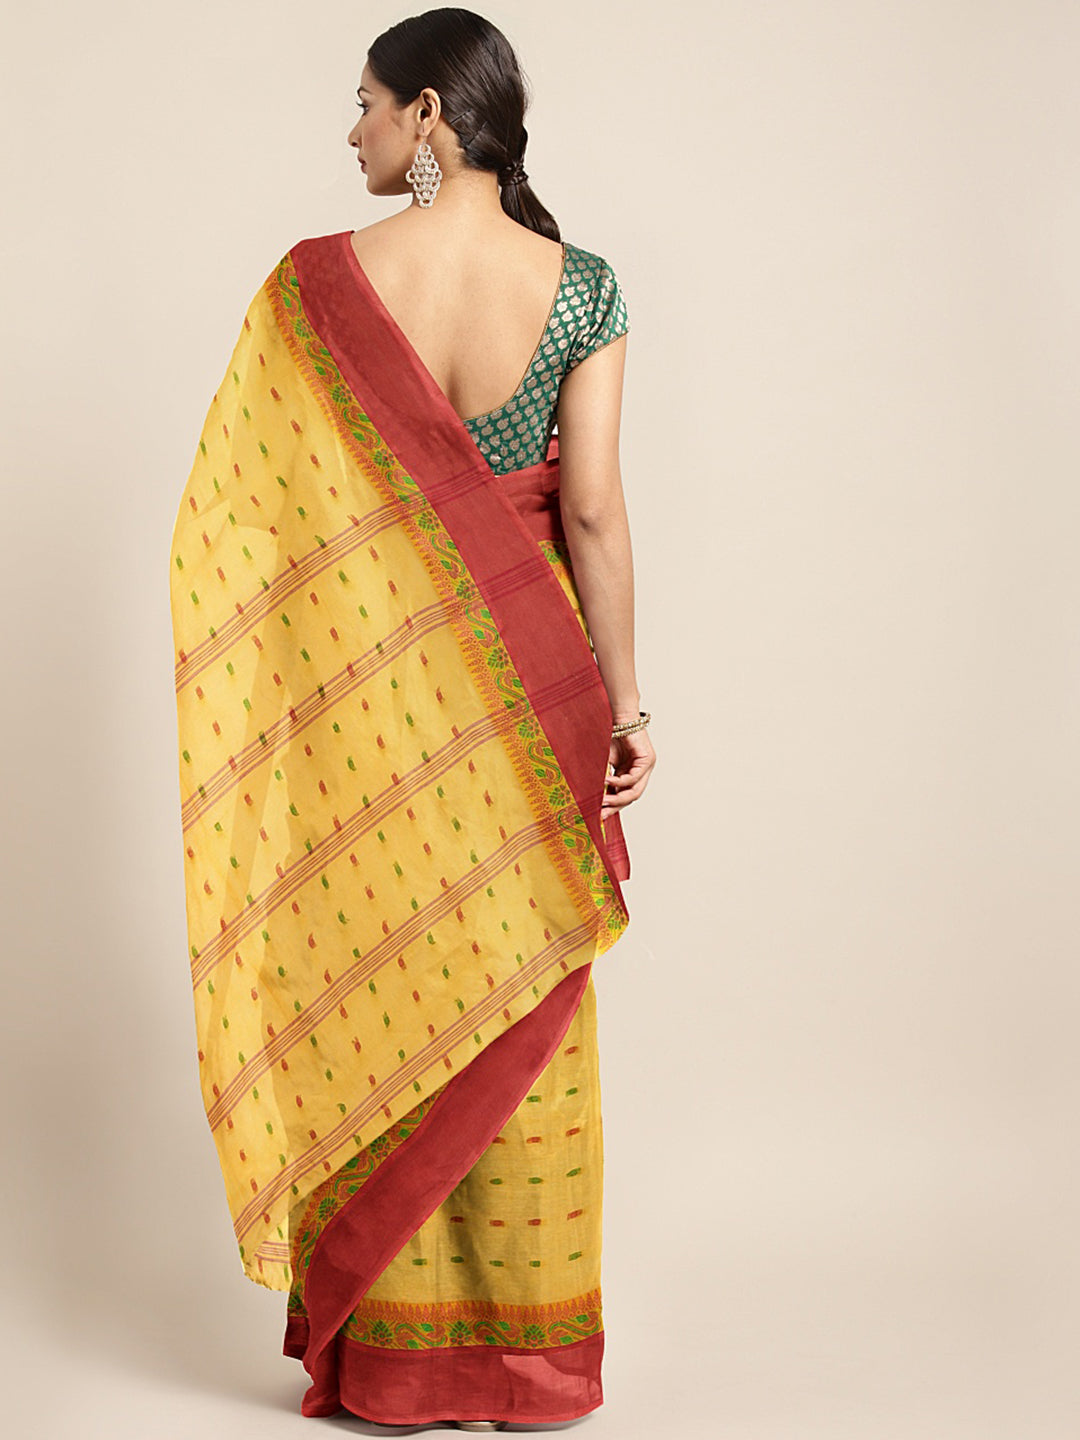 Yellow Tant Woven Design Saree Without Blouse Piece DUTASA060 DUTASA060-Saree-Kalakari India-DUTASA060-Geographical Indication, Hand Crafted, Heritage Prints, Natural Dyes, Sarees, Silk Cotton, Sustainable Fabrics, Taant, Tant, West Bengal, Woven-[Linen,Ethnic,wear,Fashionista,Handloom,Handicraft,Indigo,blockprint,block,print,Cotton,Chanderi,Blue, latest,classy,party,bollywood,trendy,summer,style,traditional,formal,elegant,unique,style,hand,block,print, dabu,booti,gift,present,glamorous,affordab